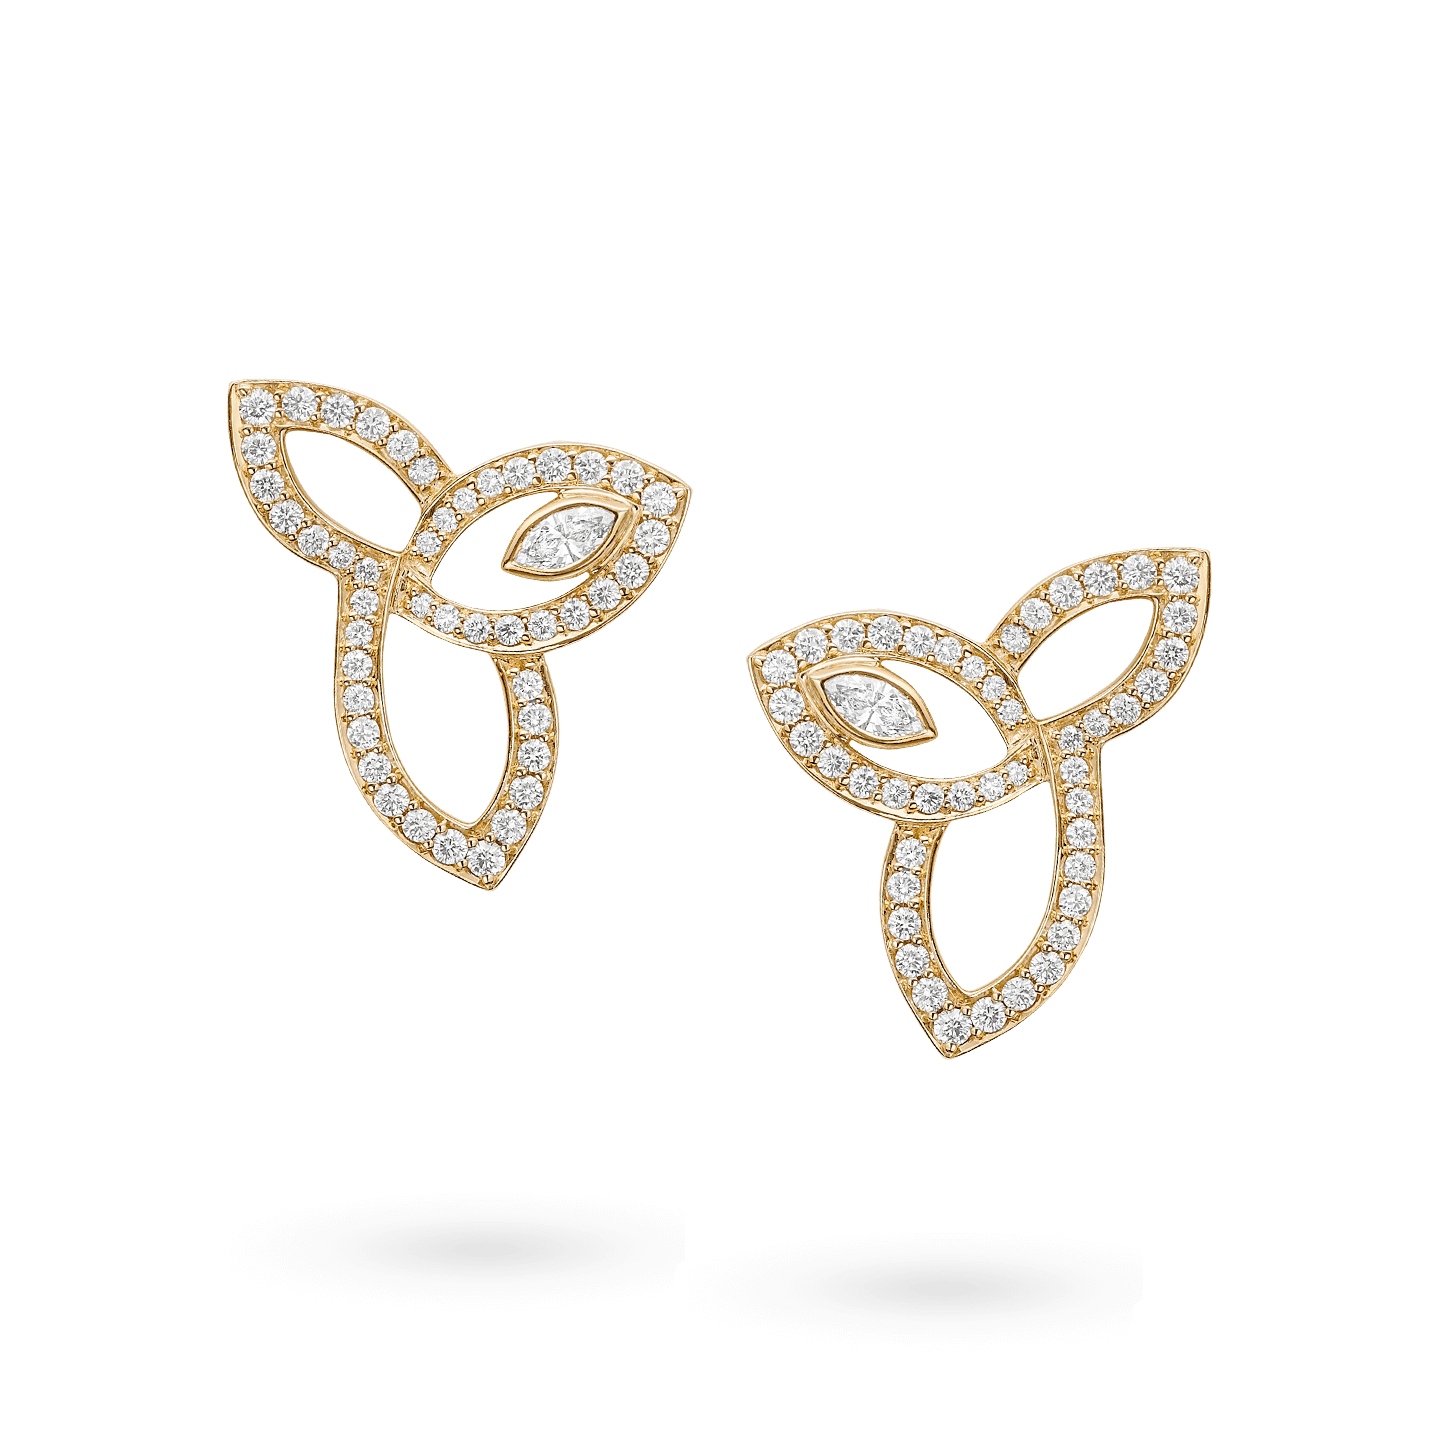 Lily Cluster Diamond Earrings in Yellow Gold, Product Image 1